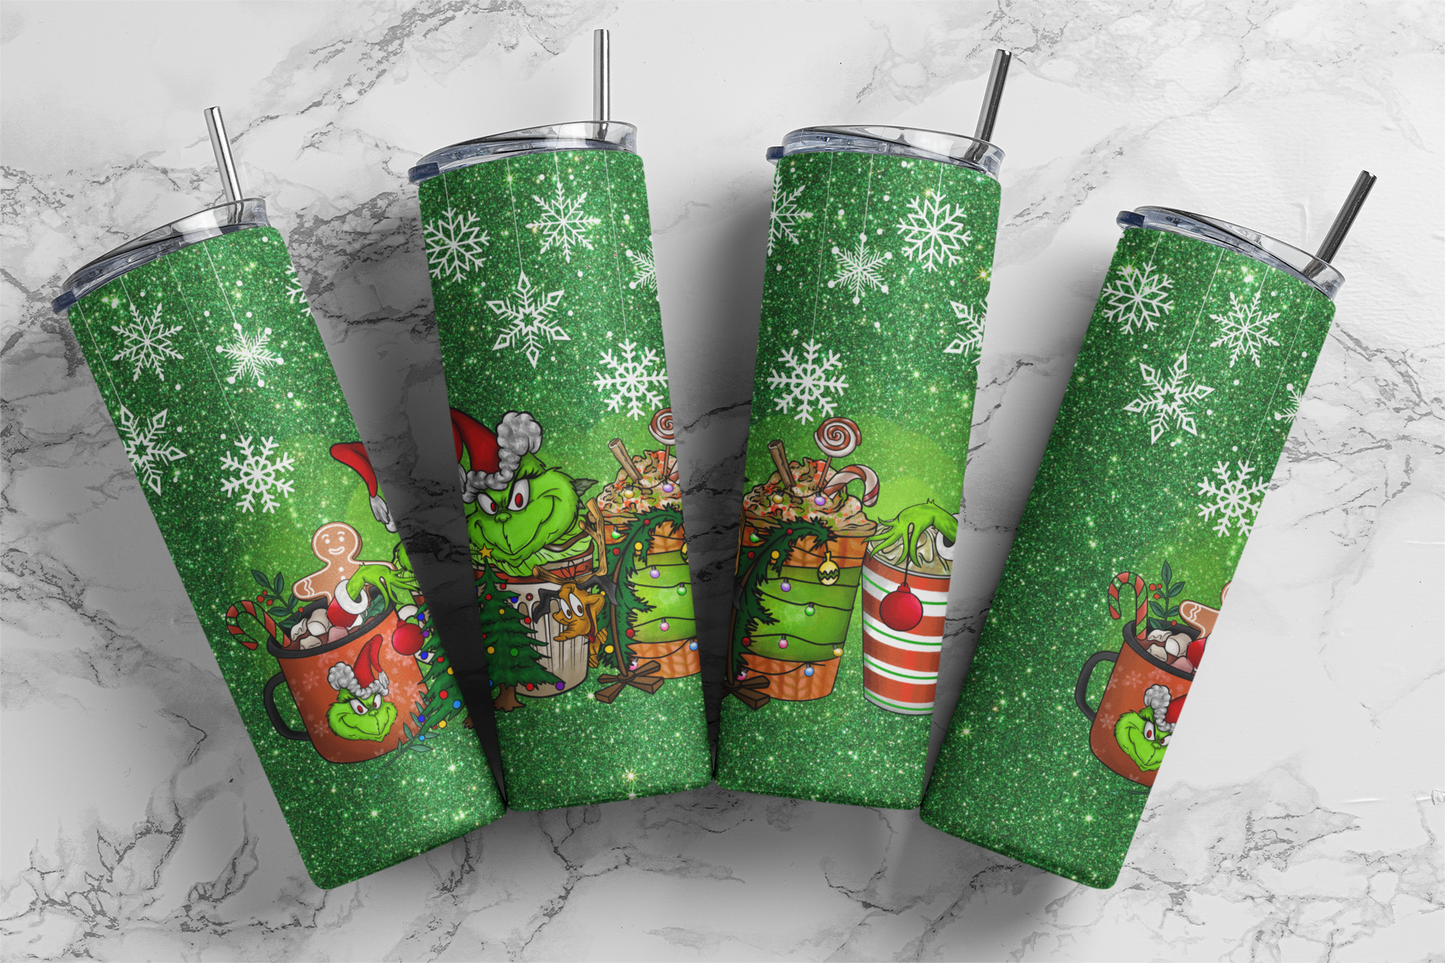 GRINCH CHRISTMAS CUP Grinch Cup Coloring Changing Cup Christmas Cups Vasos  De Navidad Christmas Gifts 